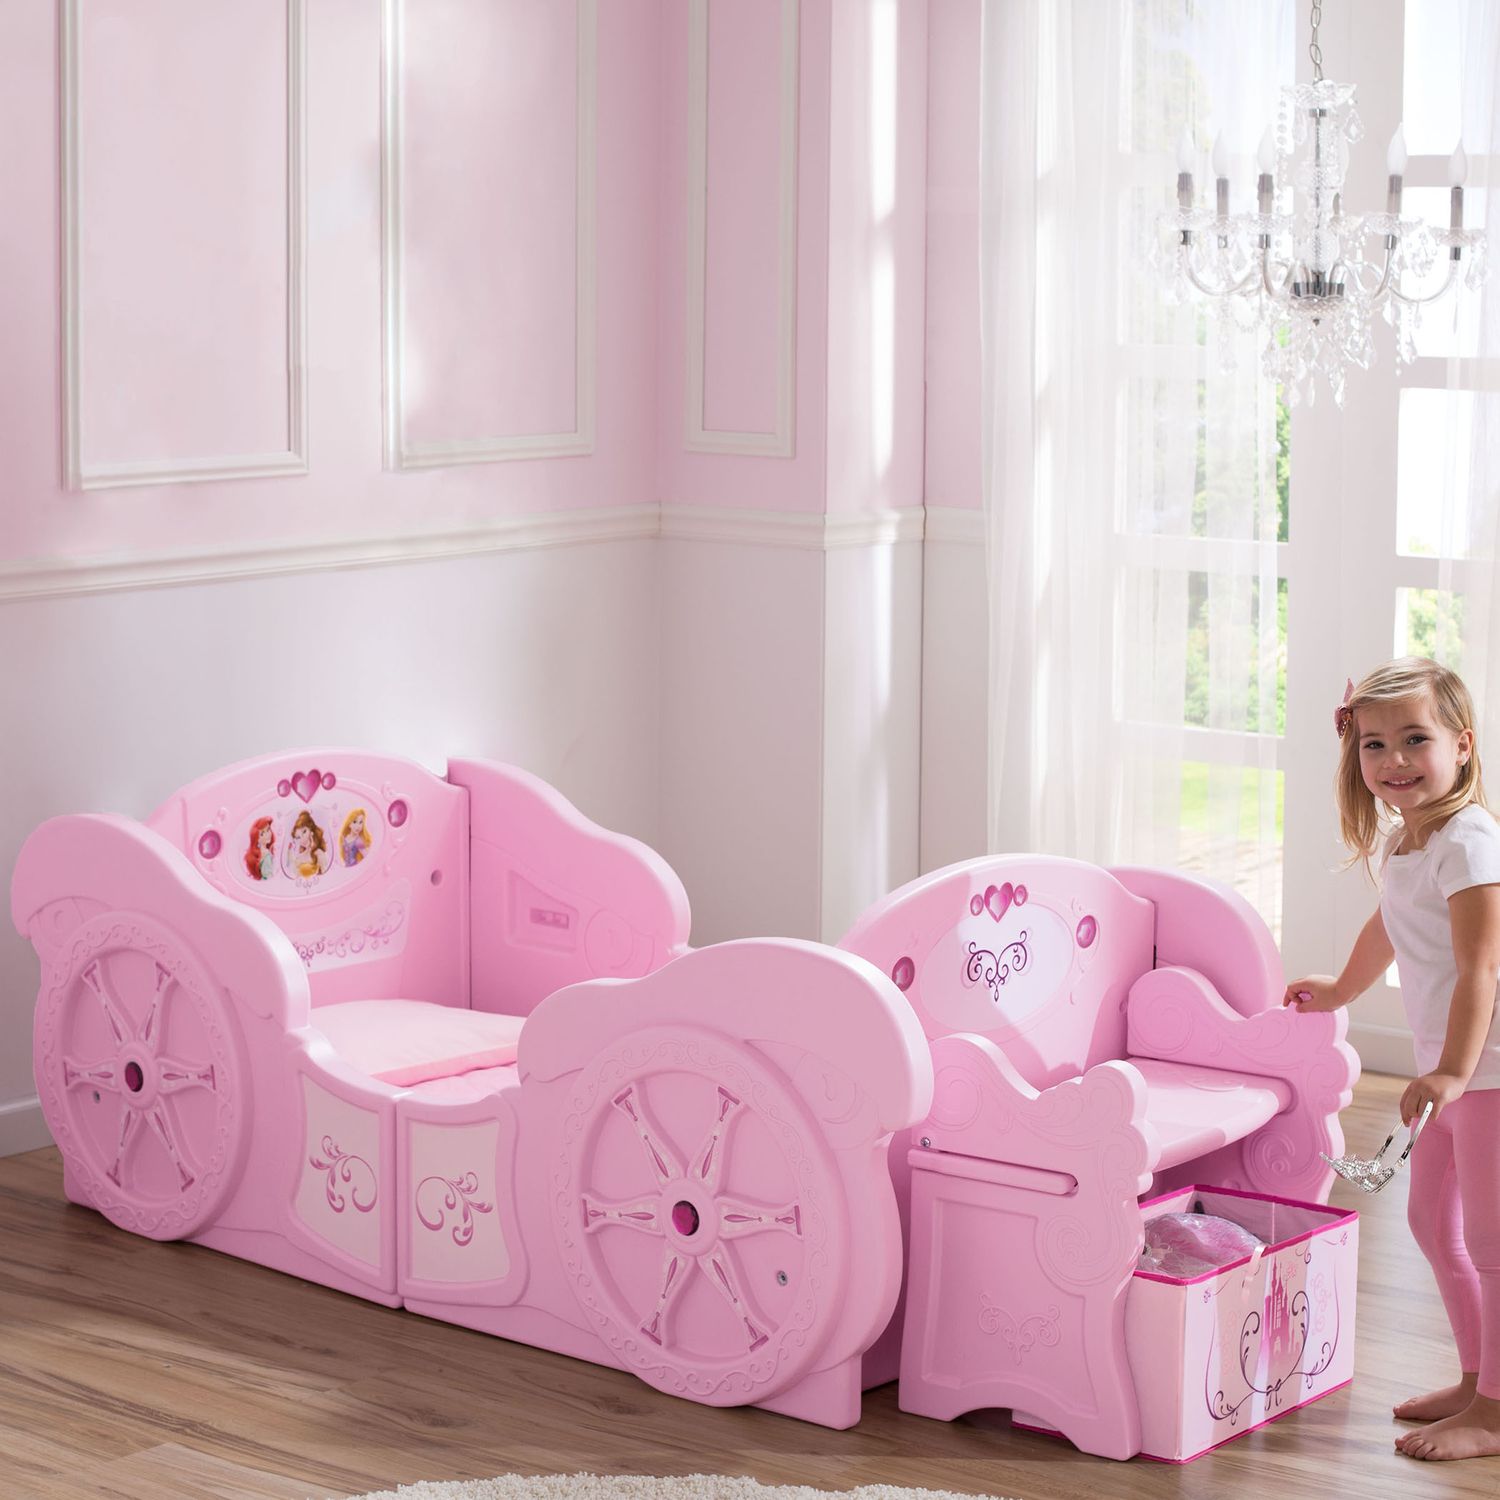 twin size princess bed